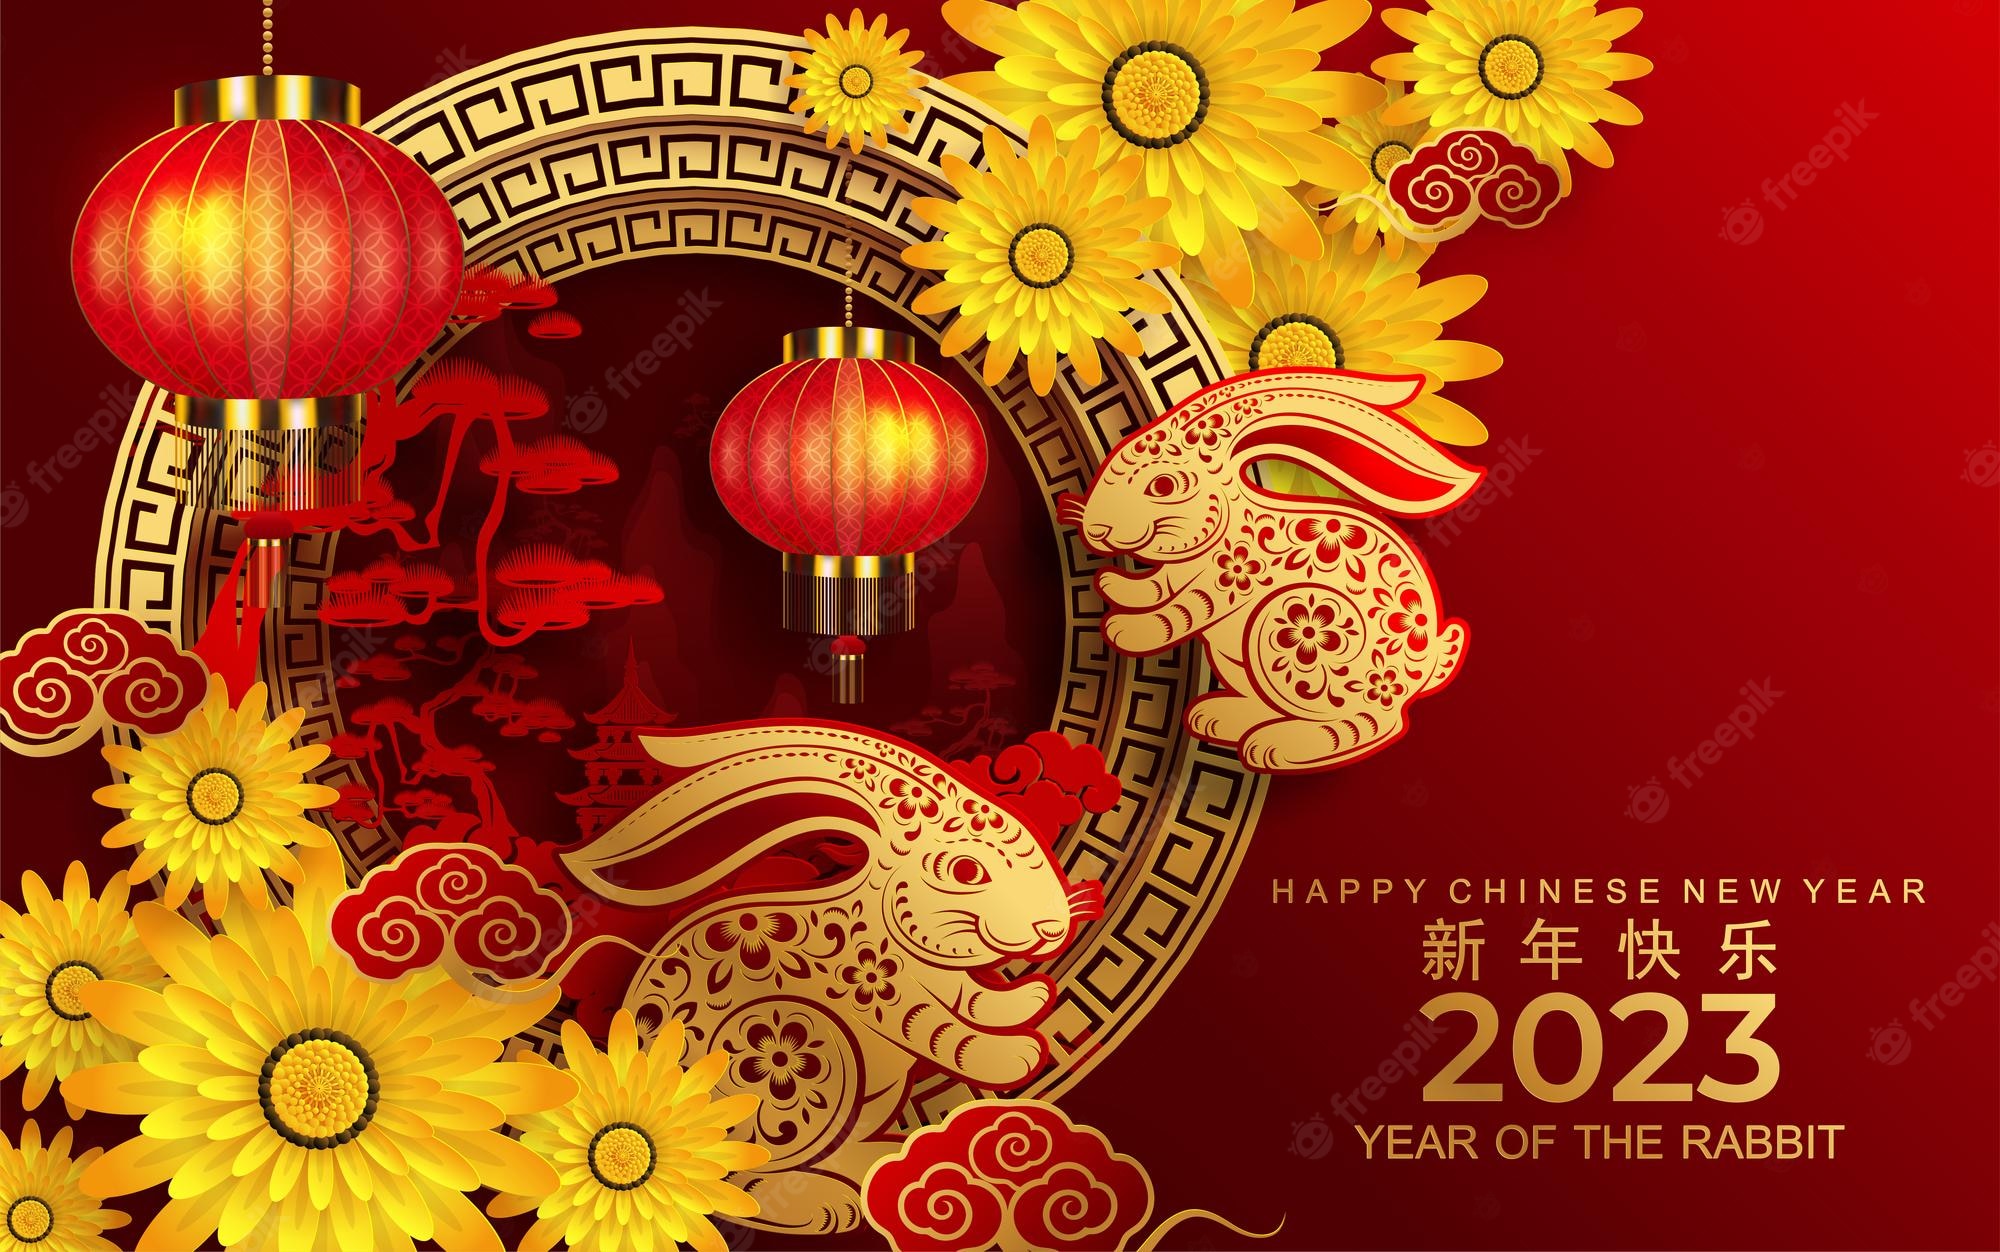 Lunar New Year Zoom Background 2023 - IMAGESEE